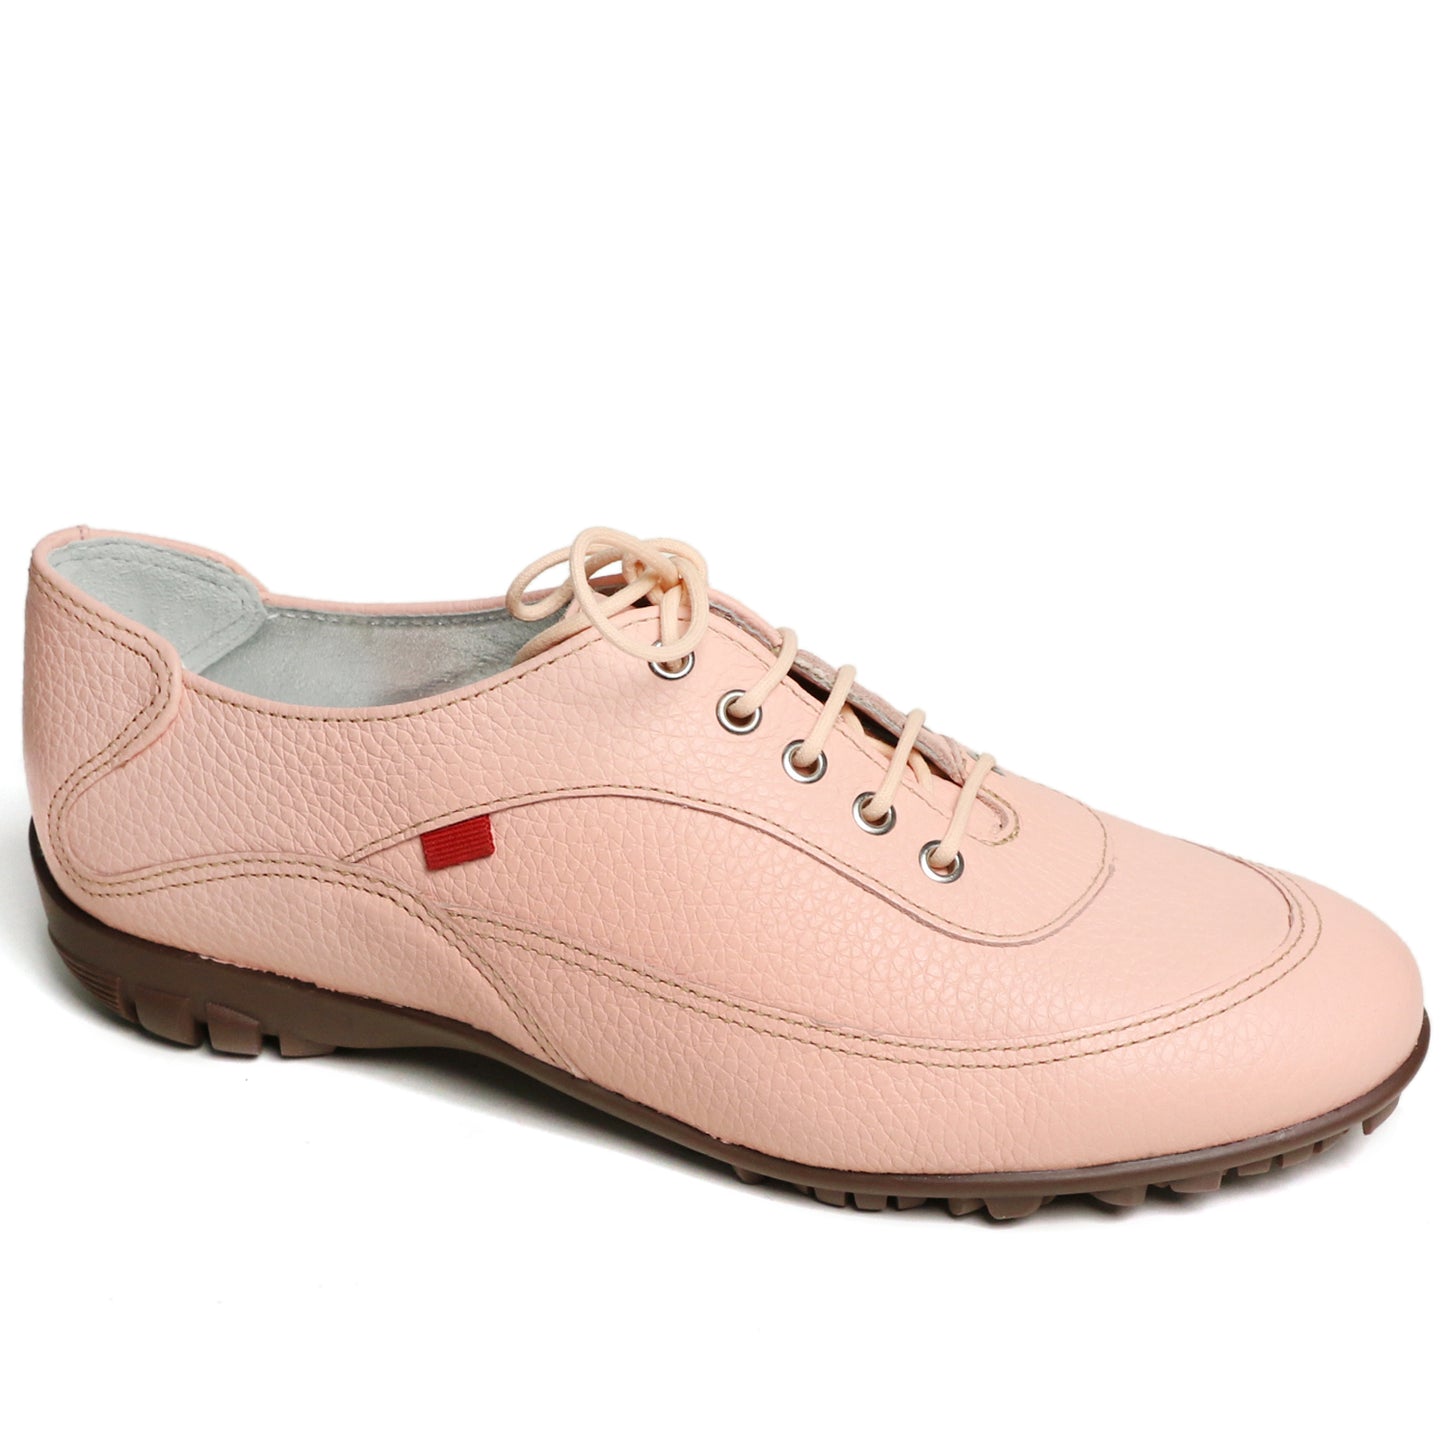 Hampton Golf - Baby Pink Tumbled Leather & Contrast Stitch